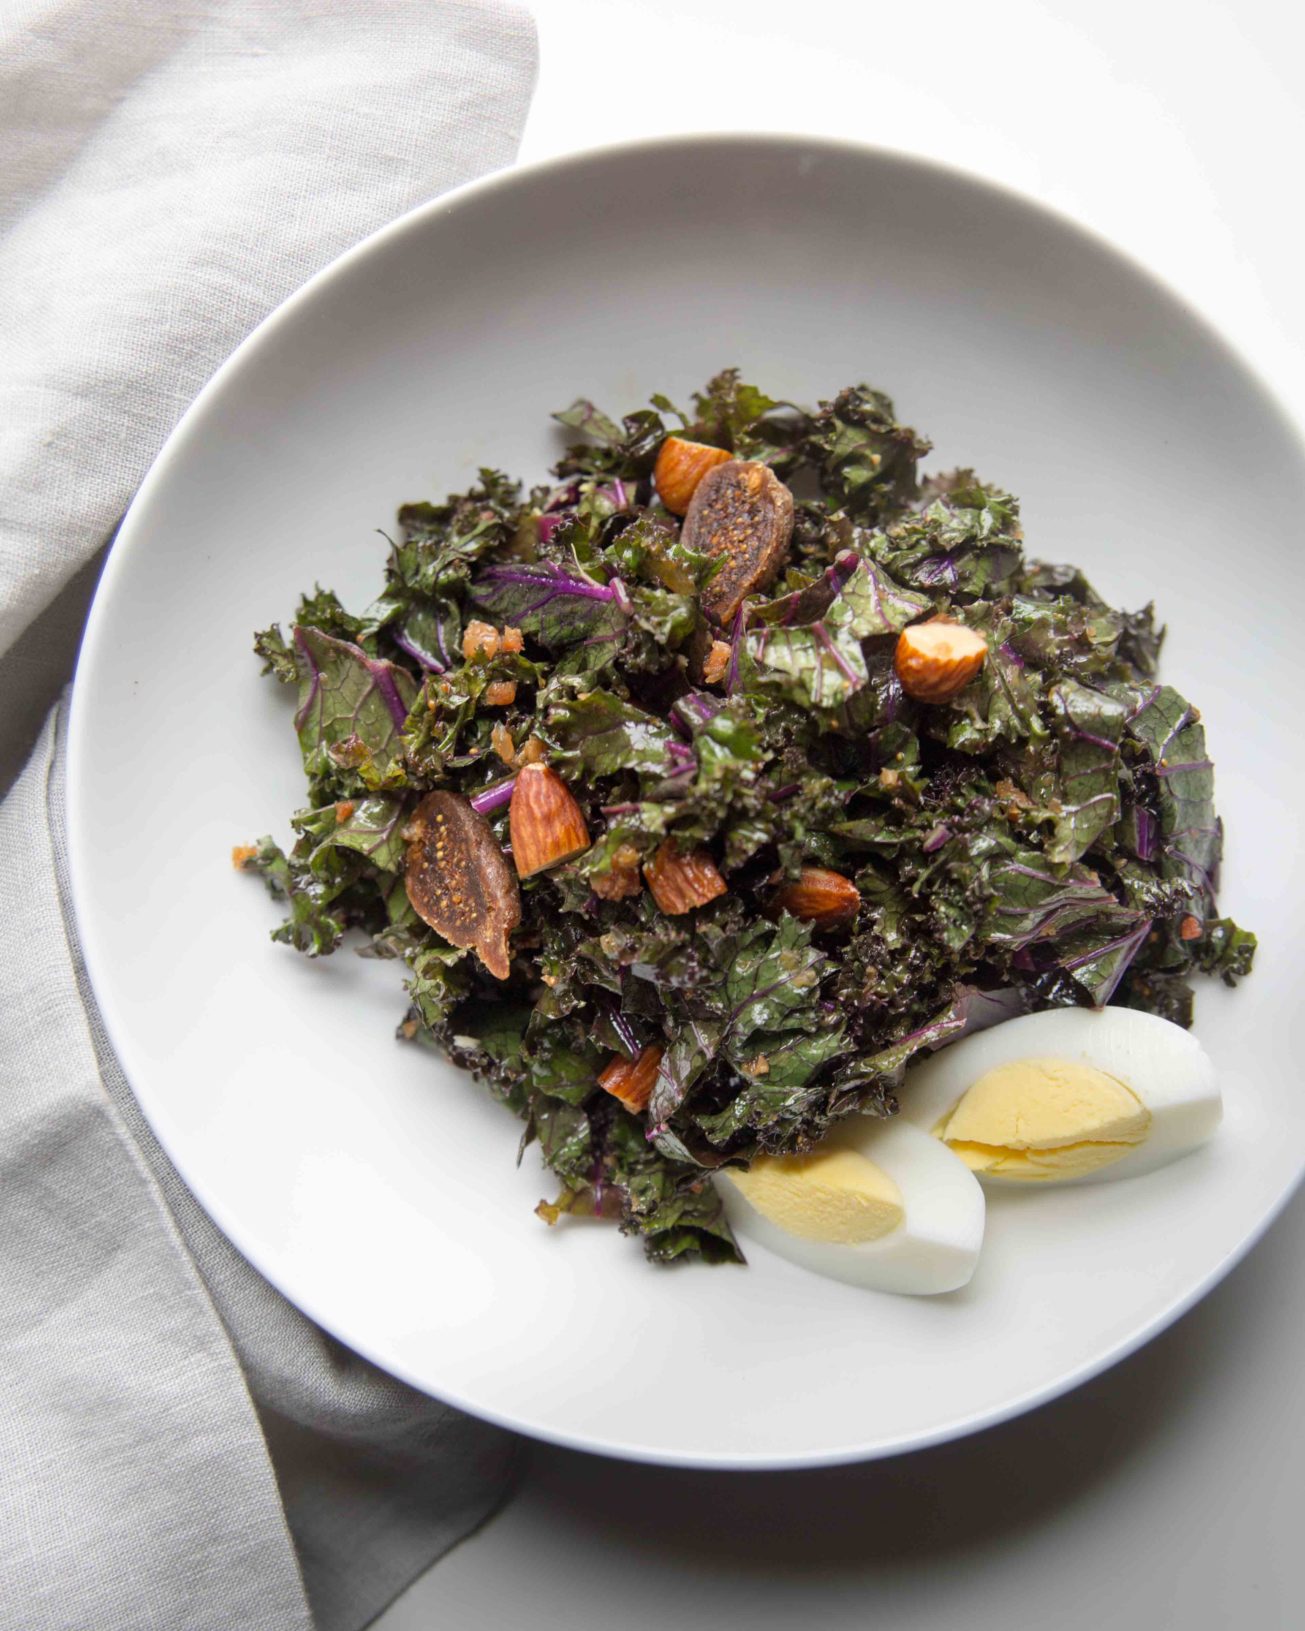 A warm kale salad is easy to make and can go main dish with sliced hard boiled eggs.